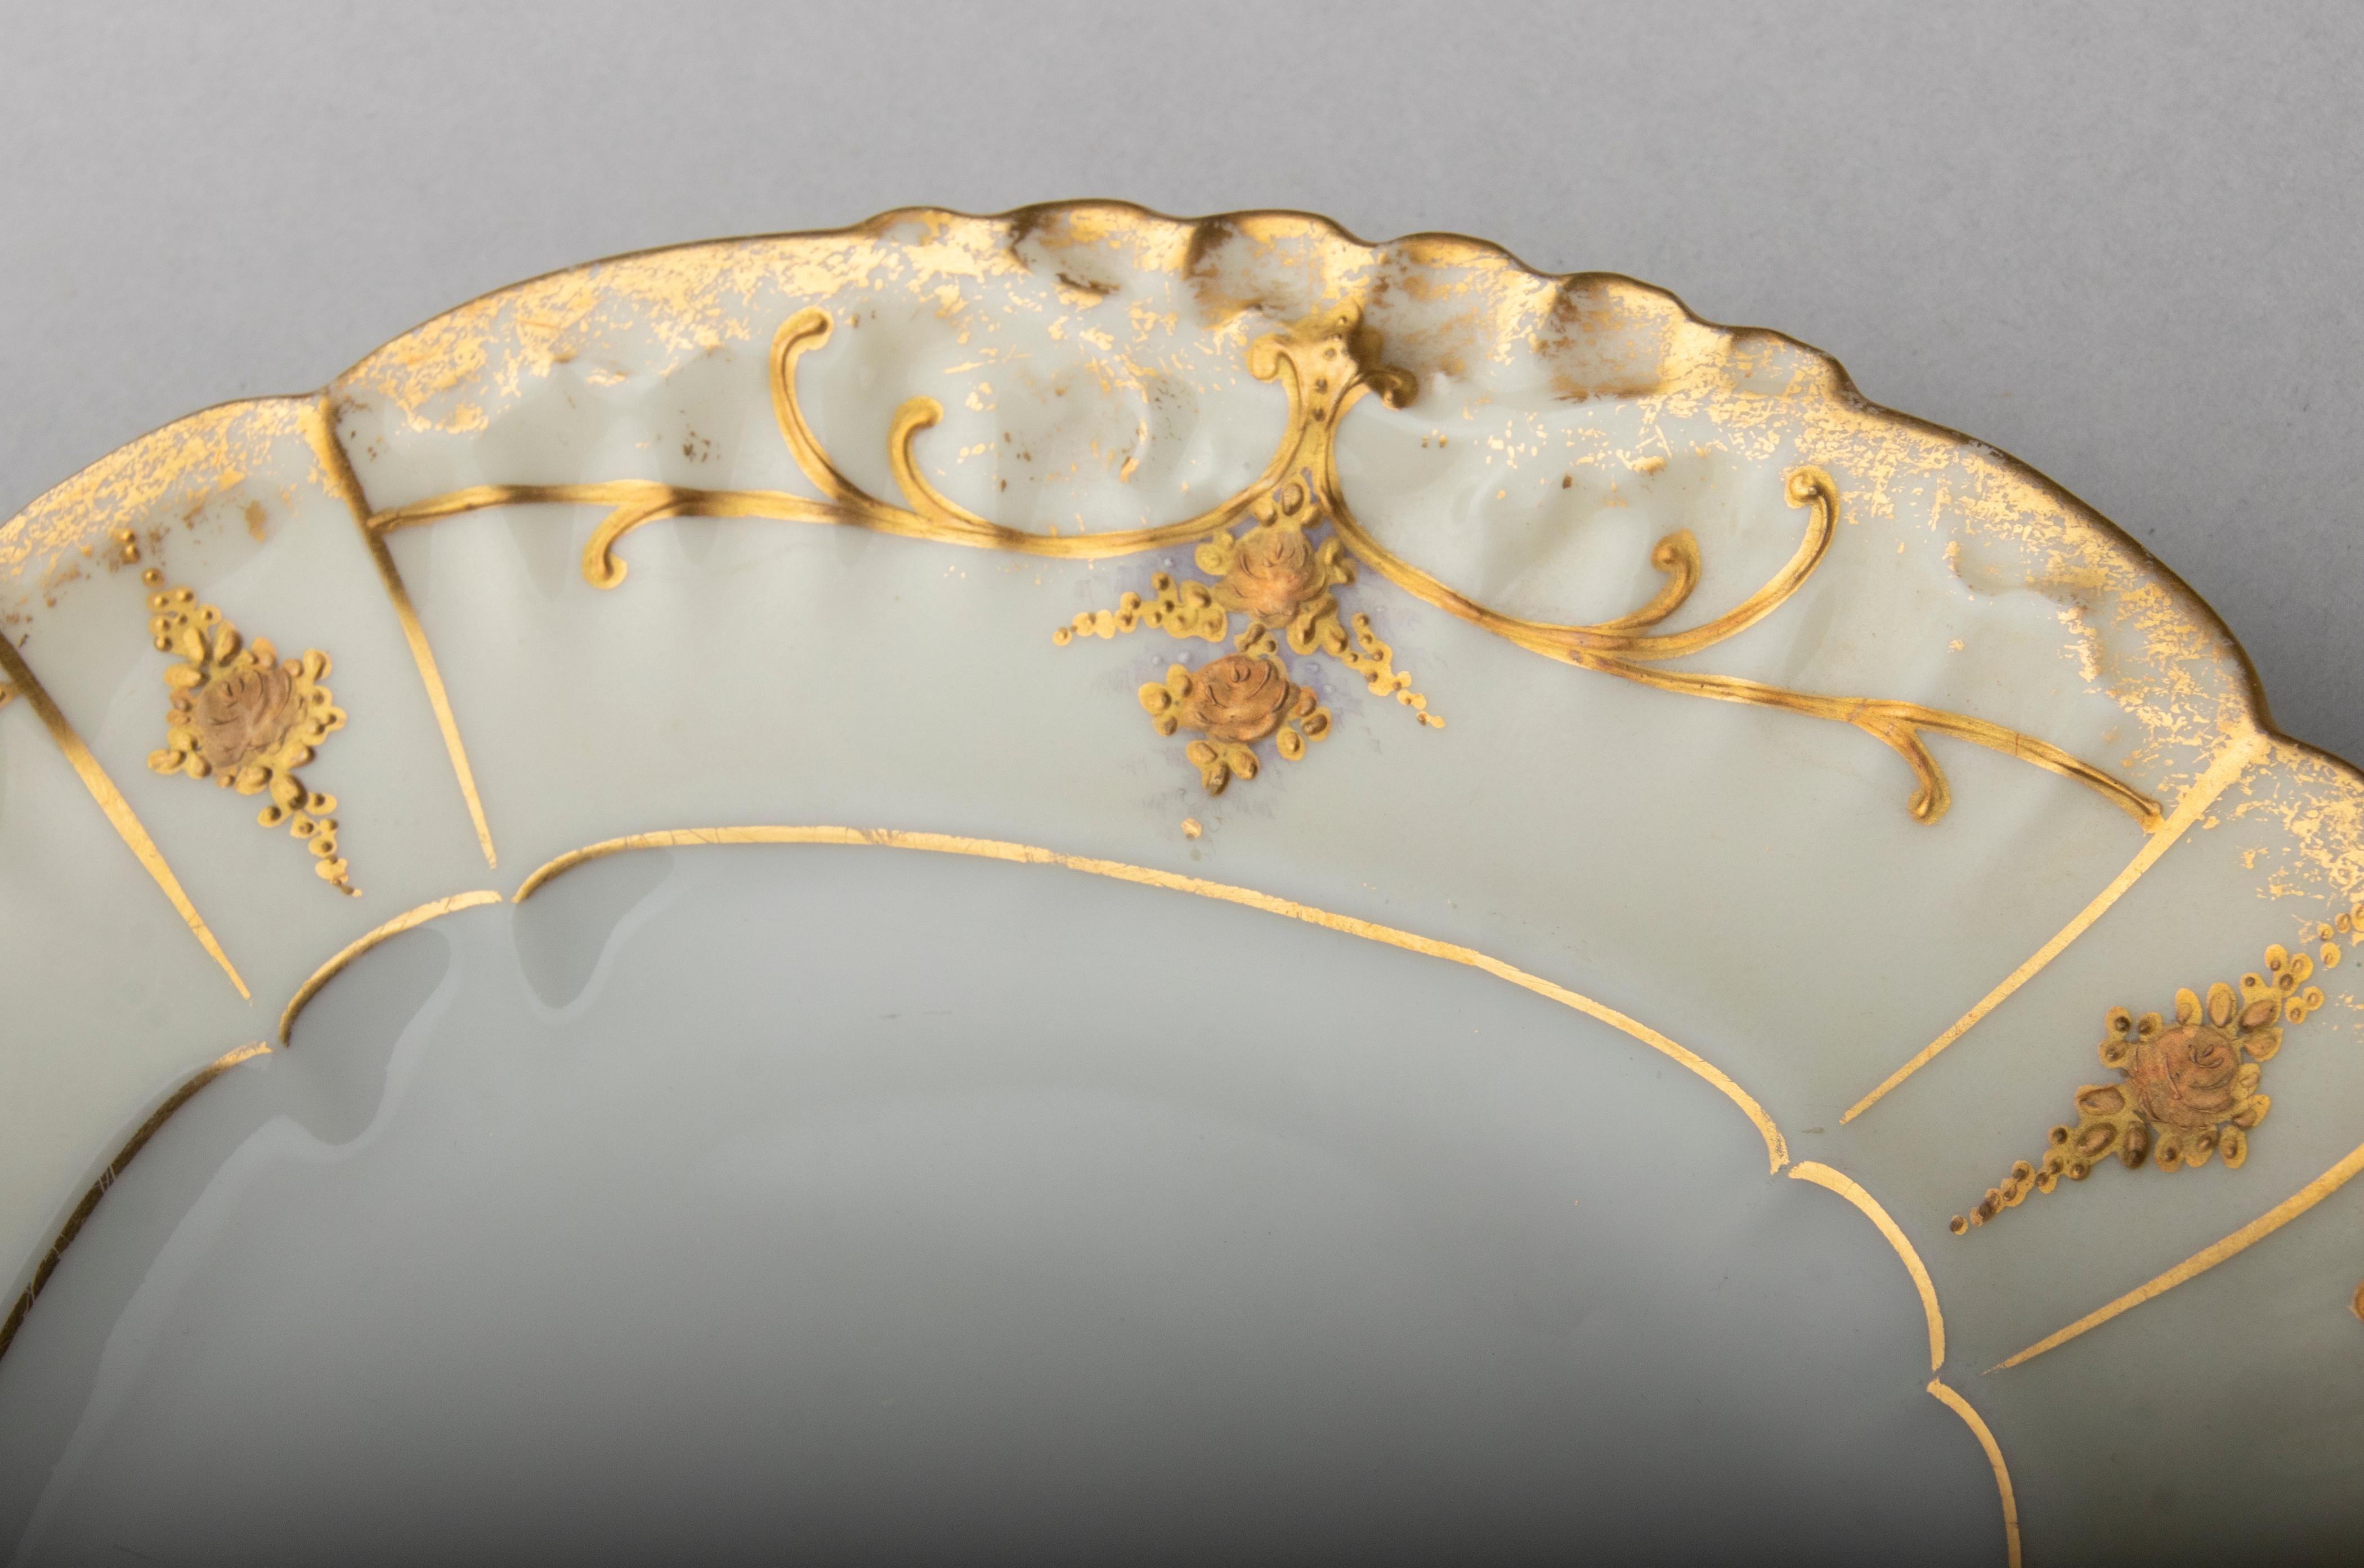 Late 19th Century Set of 11 Early 20th Century Porcelain Dessert Plates Gilded by Limoges